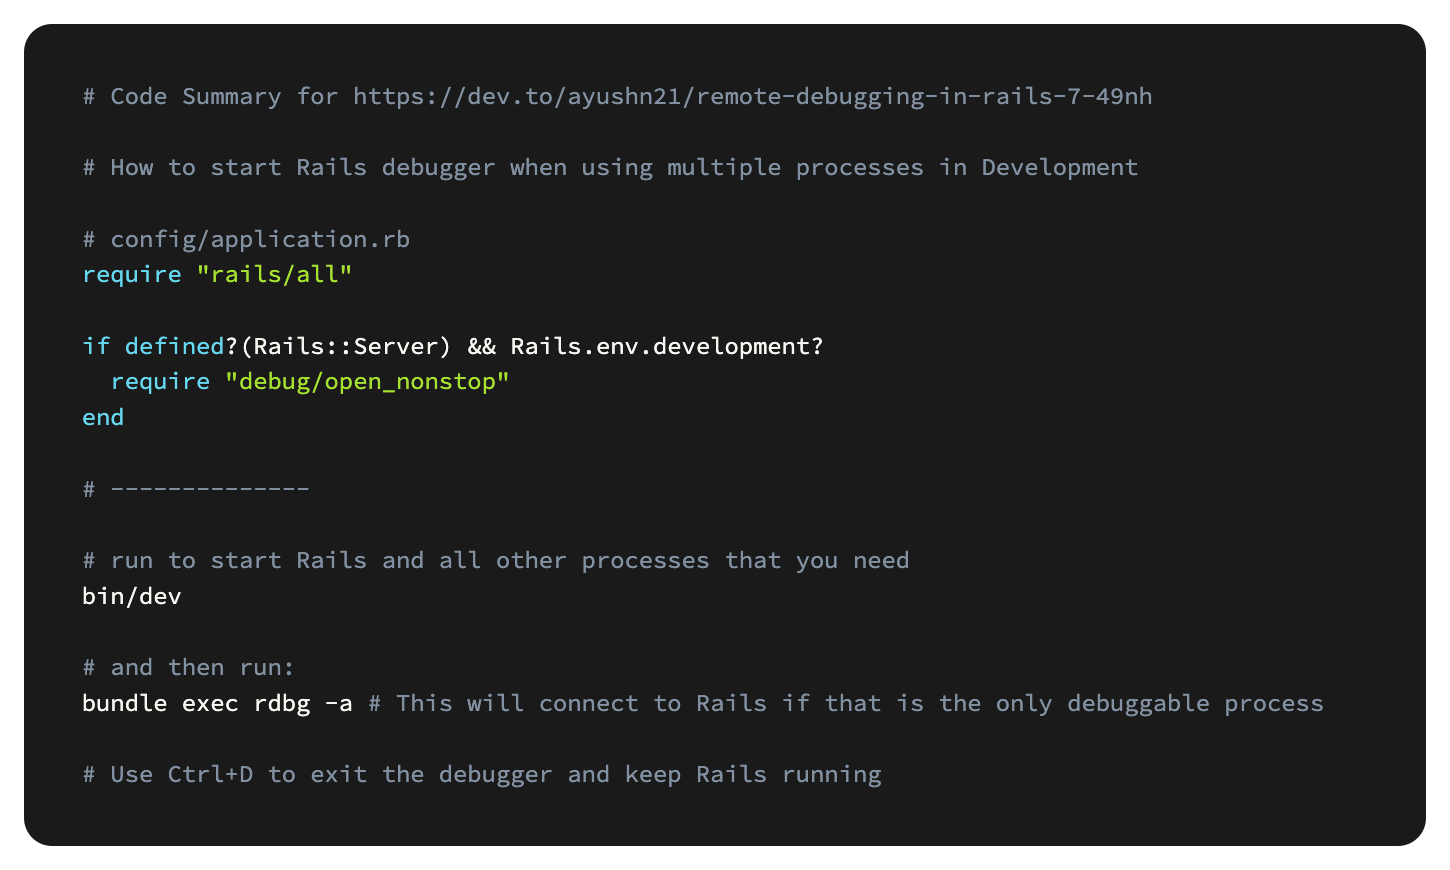 # Code Summary for https://dev.to/ayushn21/remote-debugging-in-rails-7-49nh  # How to start Rails debugger when using multiple processes in Development  # config/application.rb require "rails/all"  if defined?(Rails::Server) && Rails.env.development?   require "debug/open_nonstop" end  # --------------  # run to start Rails and all other processes that you need bin/dev  # and then run:  bundle exec rdbg -a # This will connect to Rails if that is the only debuggable process  # Use Ctrl+D to exit the debugger and keep Rails running